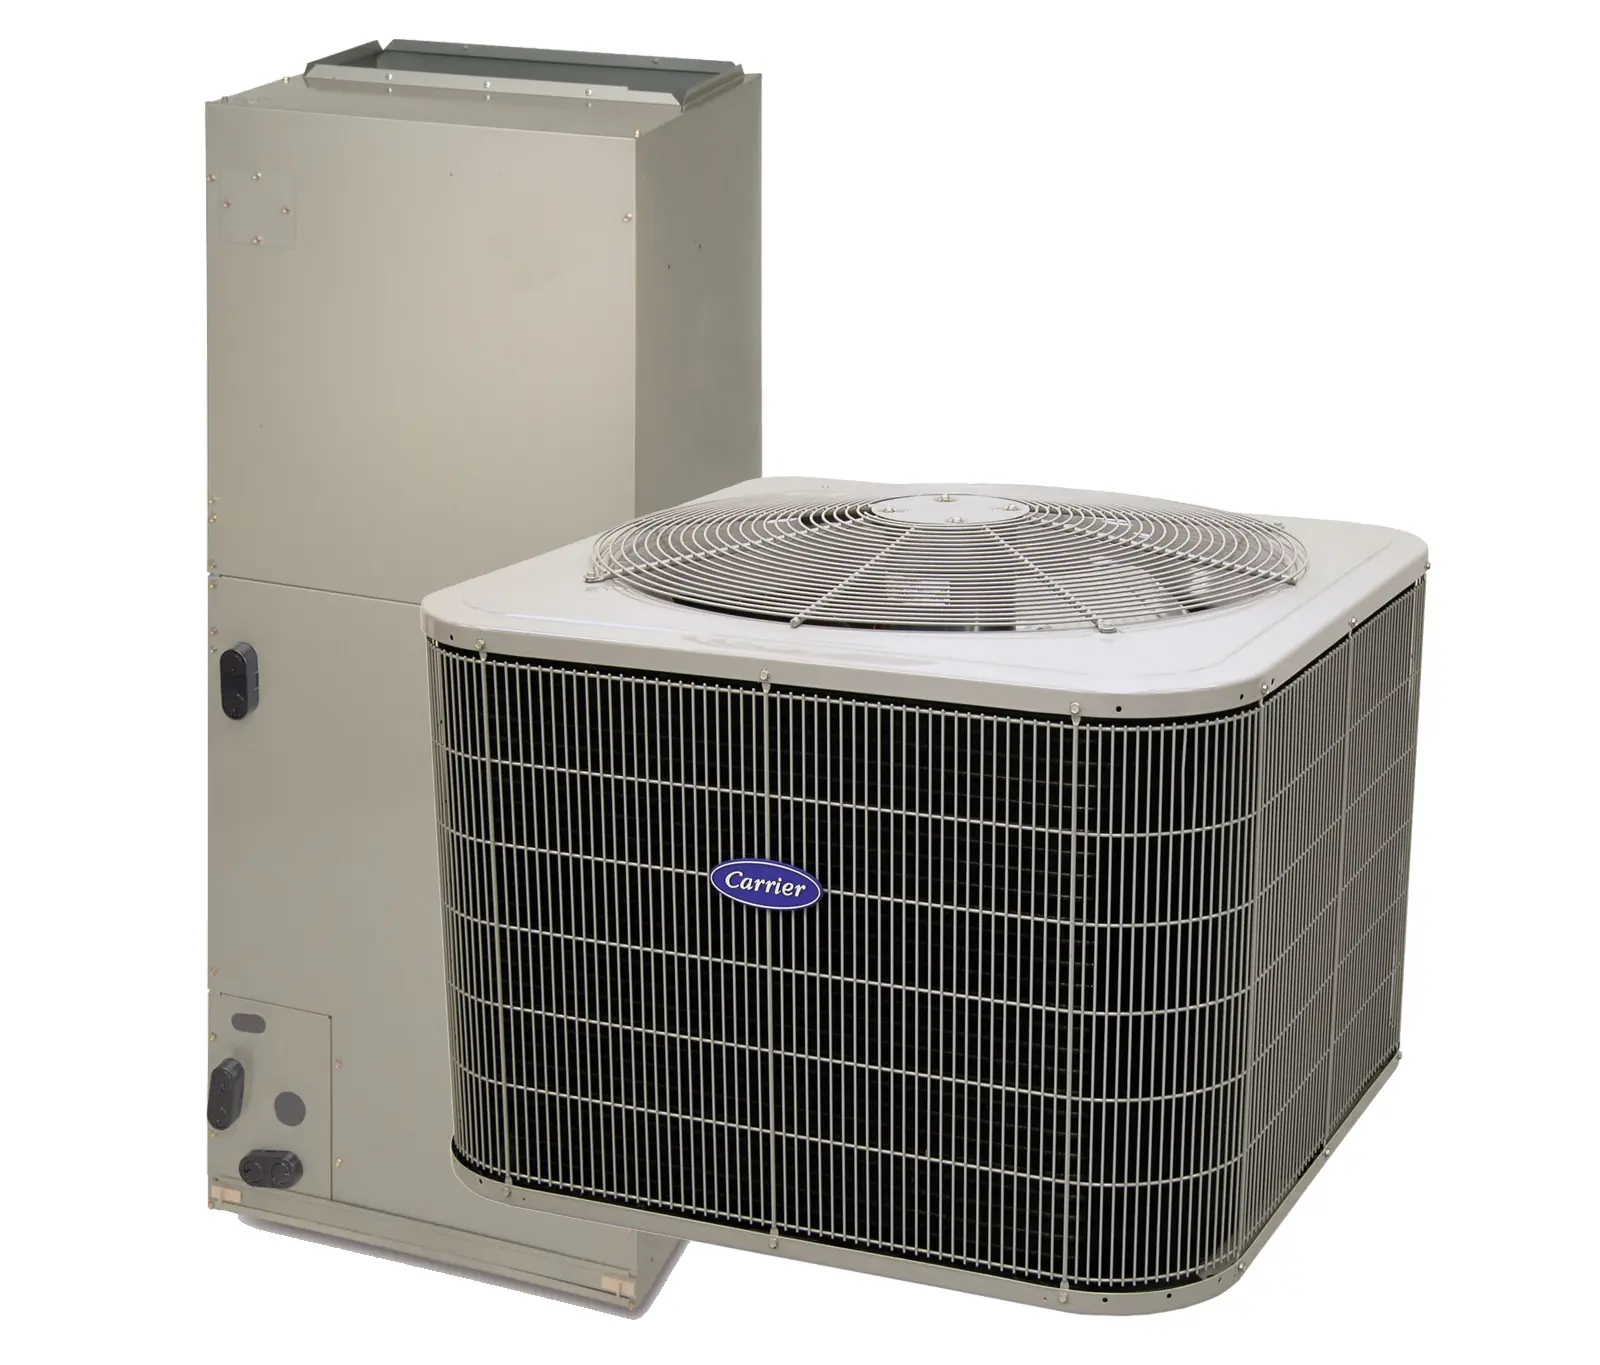 Carrier Brand Air Handler and Condensing Unit